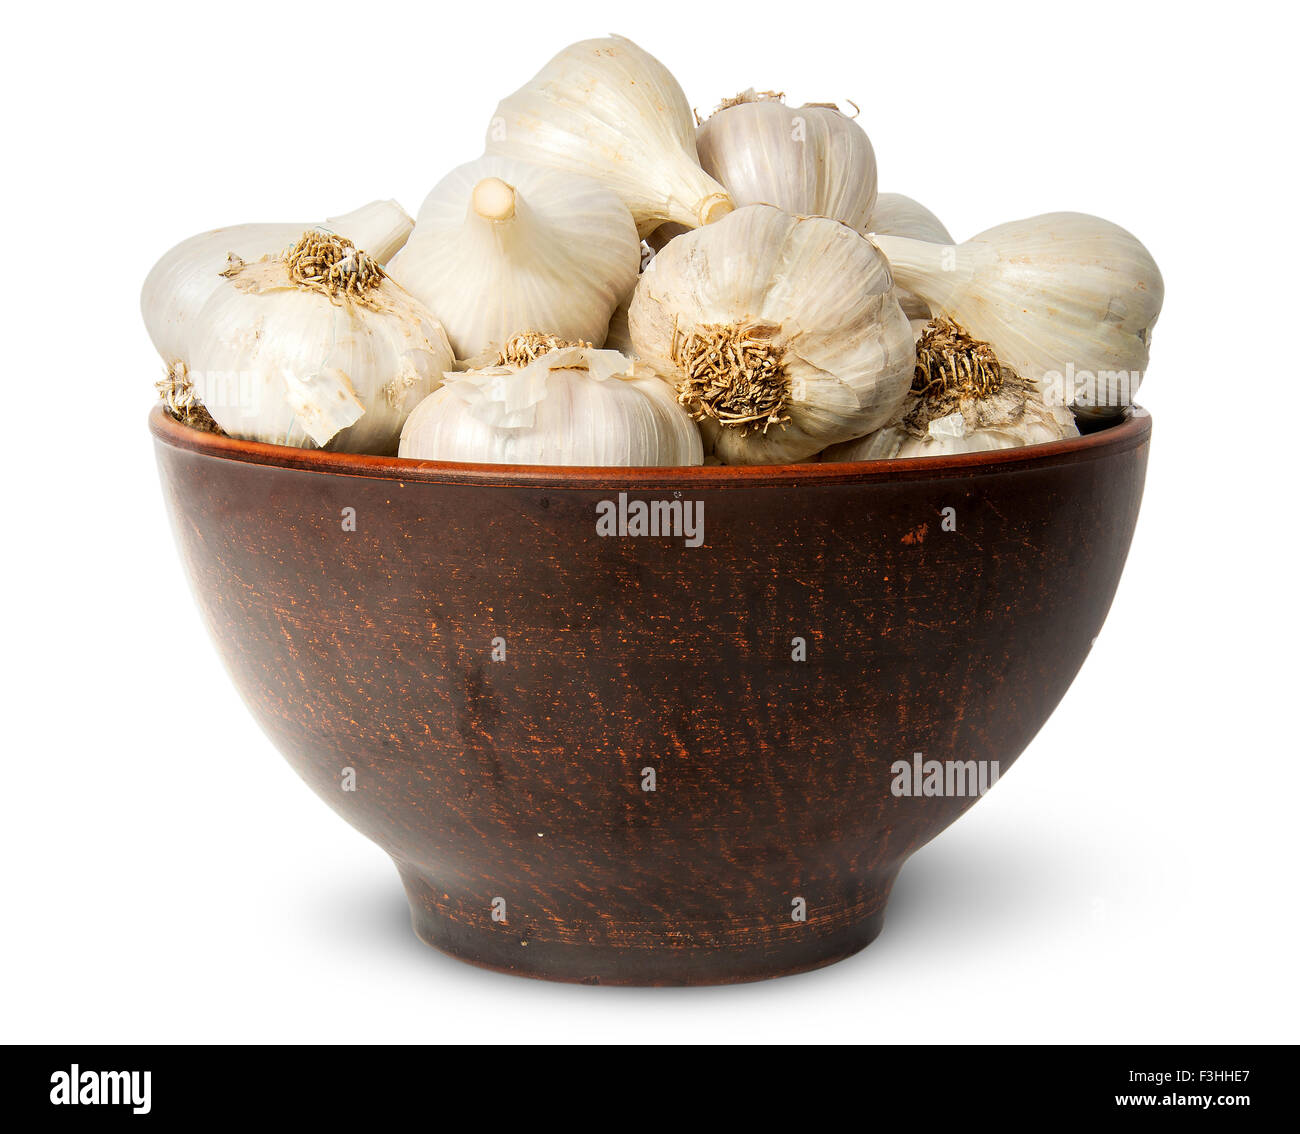 In front whole head of garlic in ceramic bowl isolated on white background Stock Photo